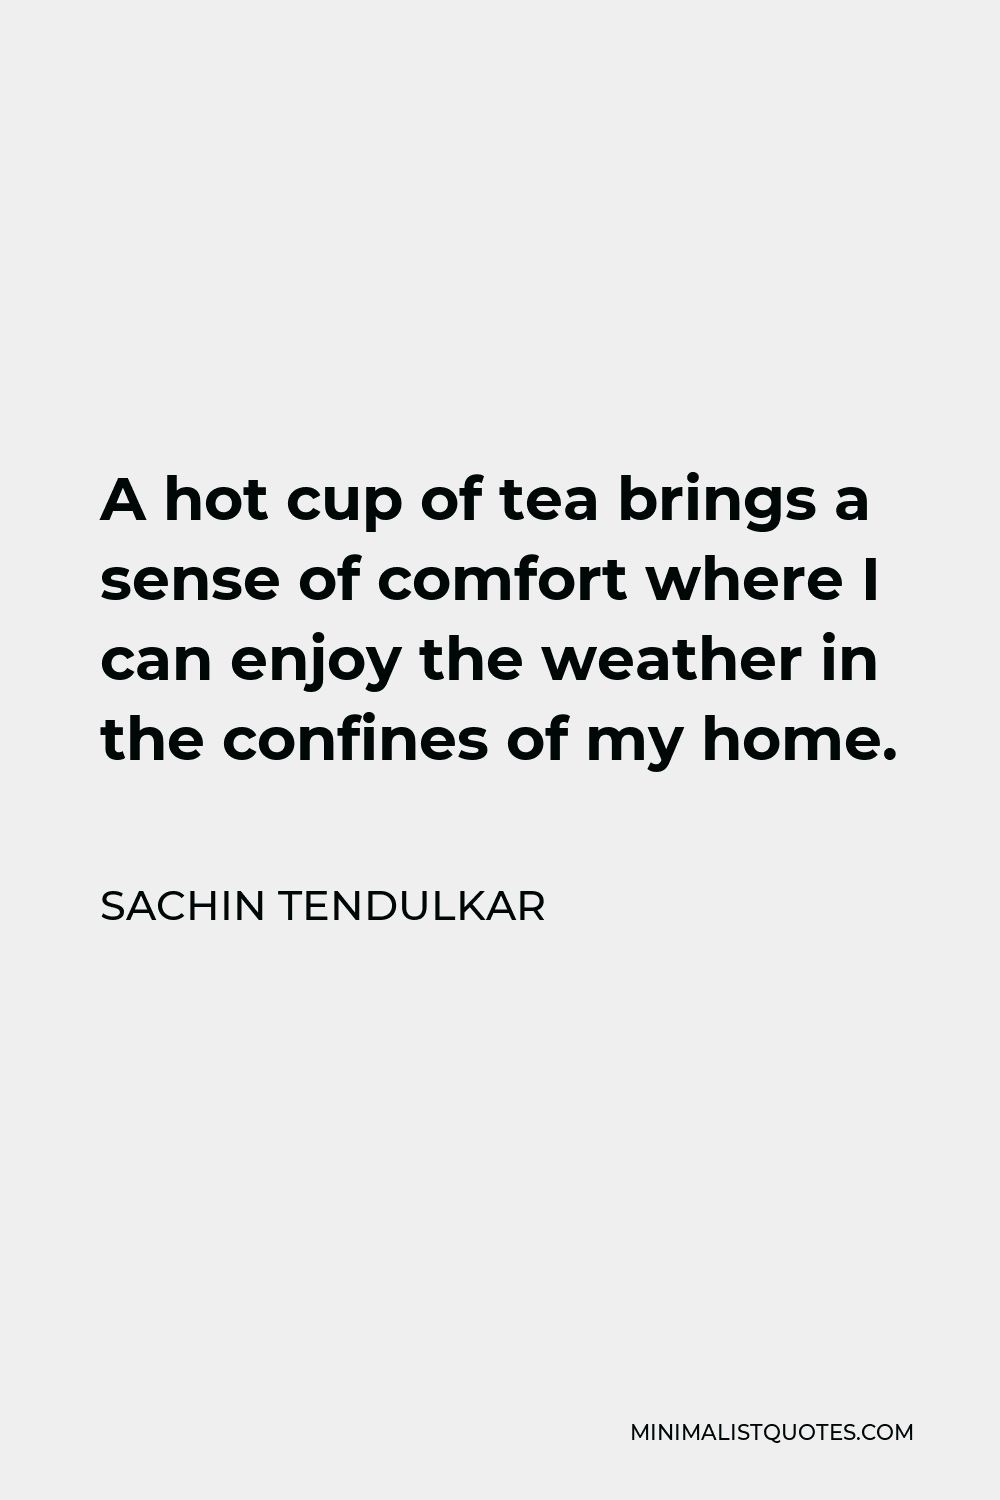 Sachin Tendulkar Quote - A hot cup of tea brings a sense of comfort where I can enjoy the weather in the confines of my home.